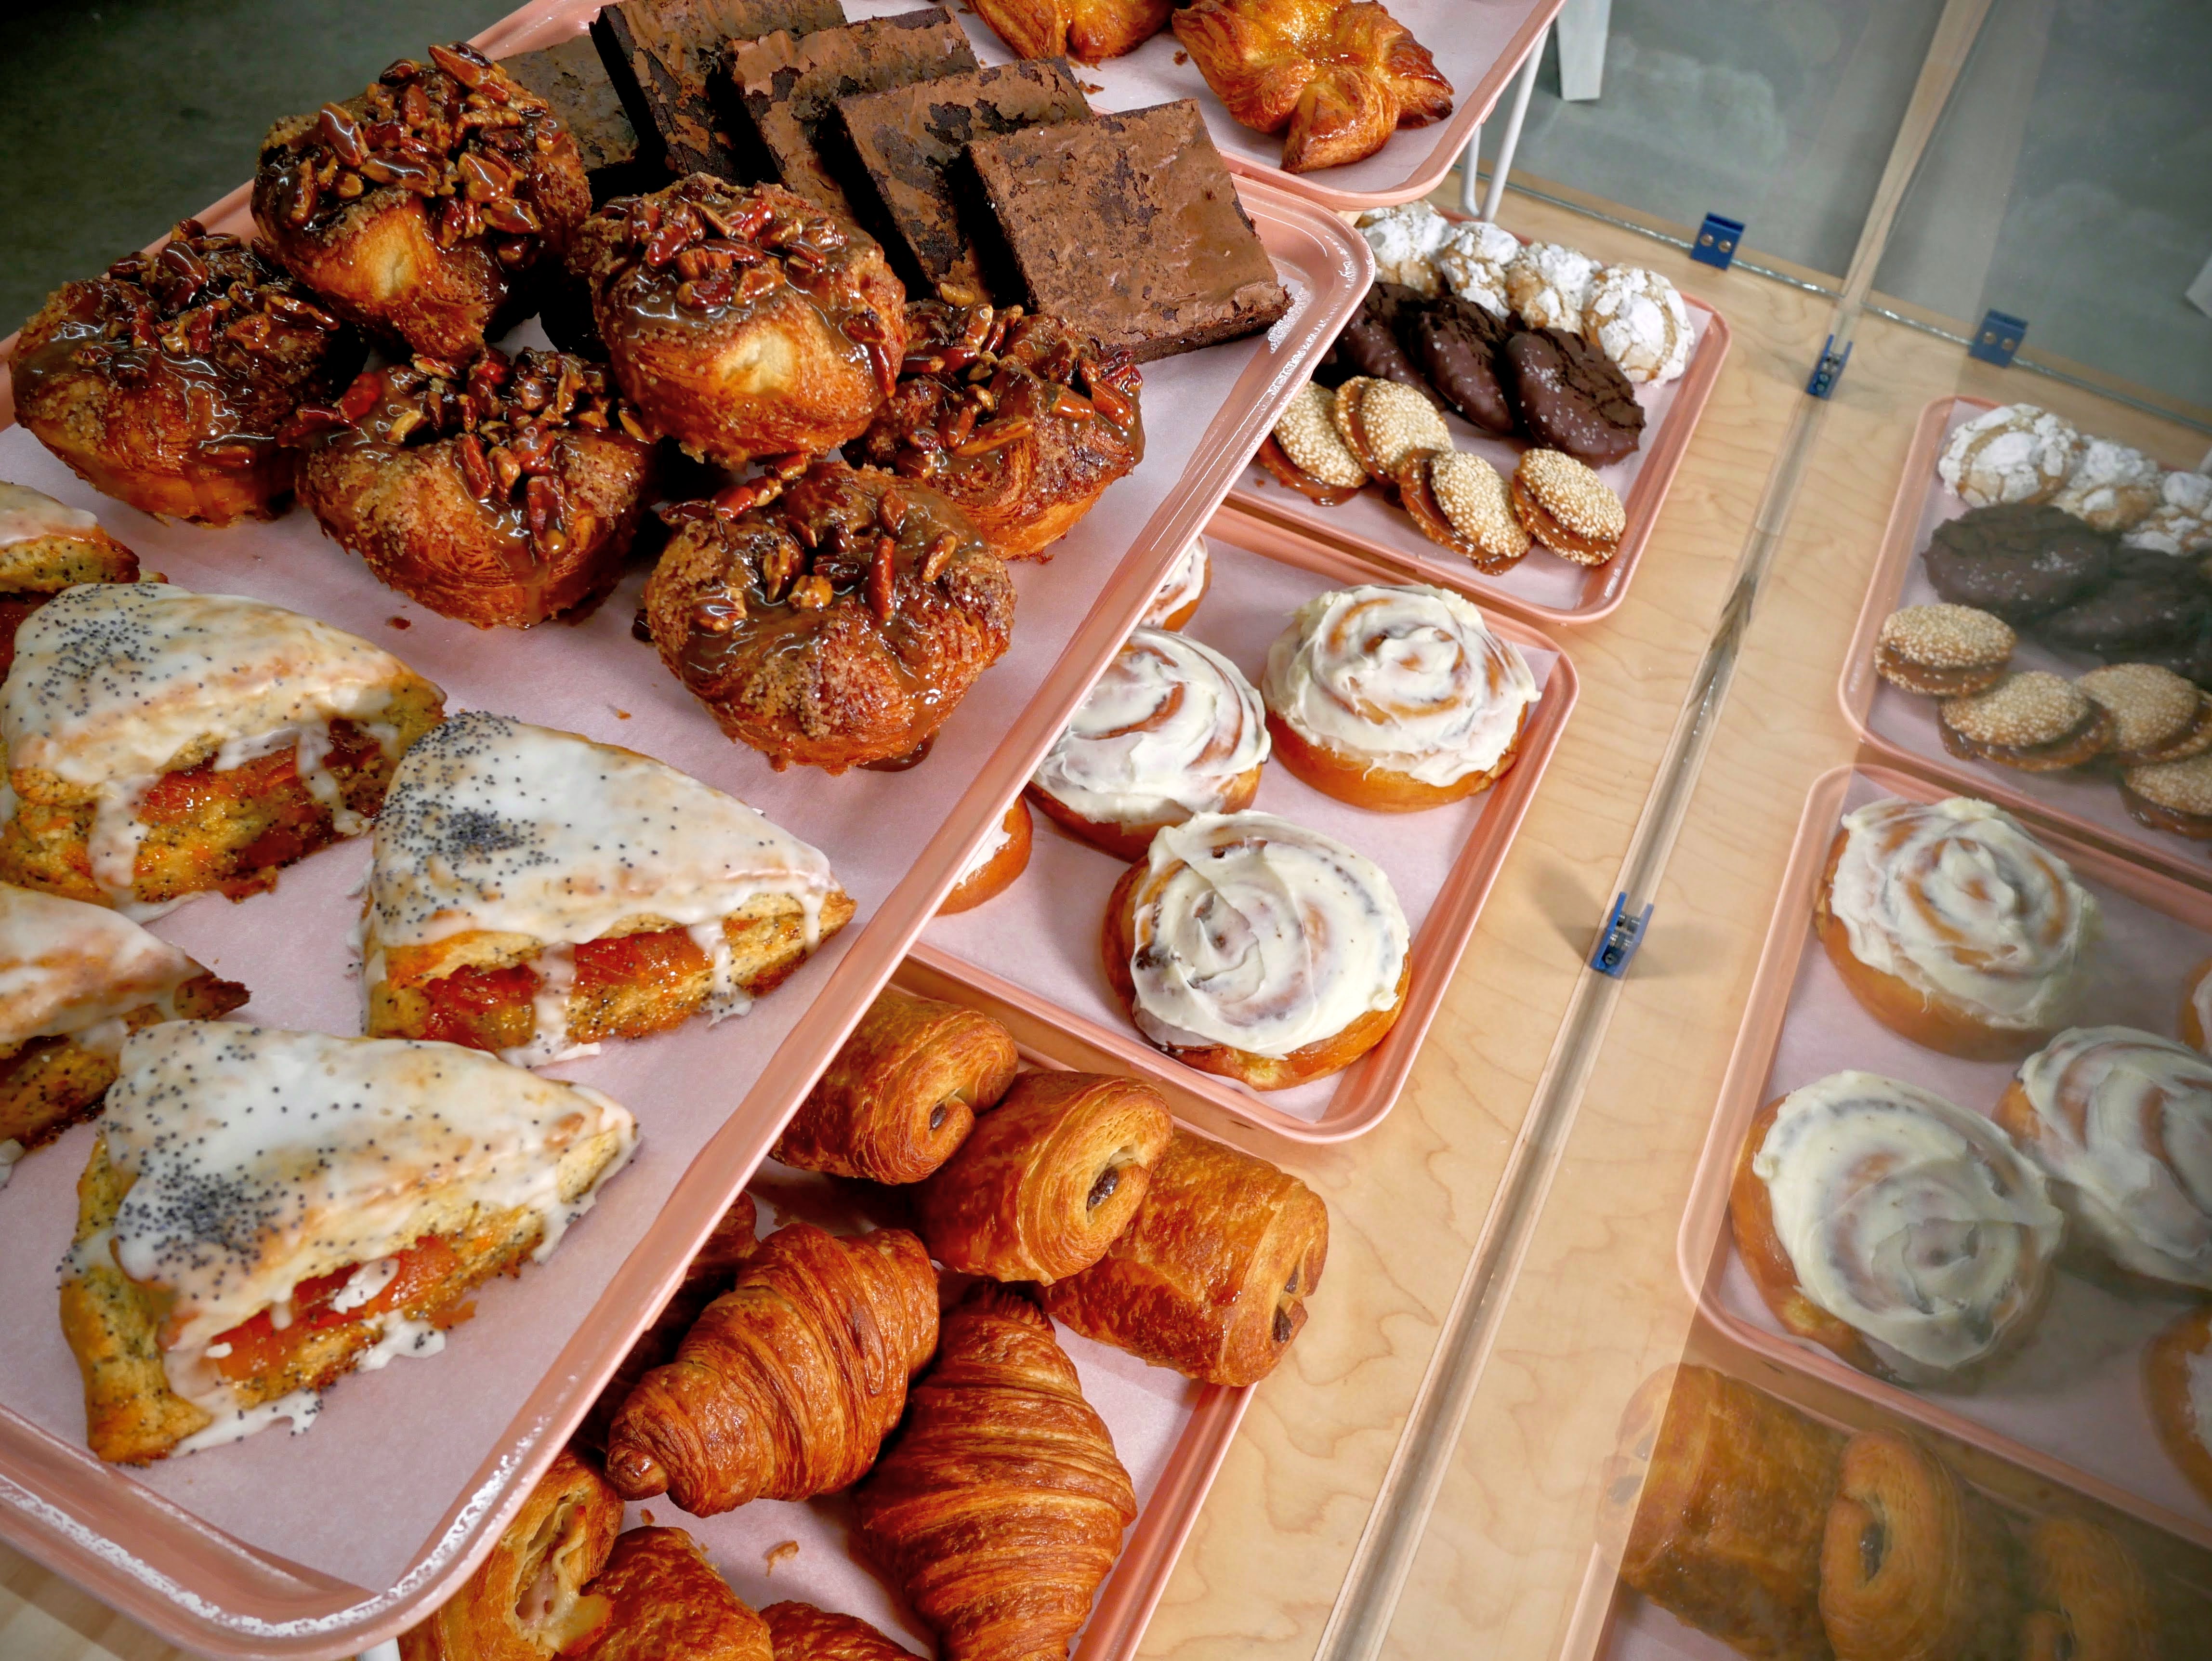 A tiered glass display of various pastries.